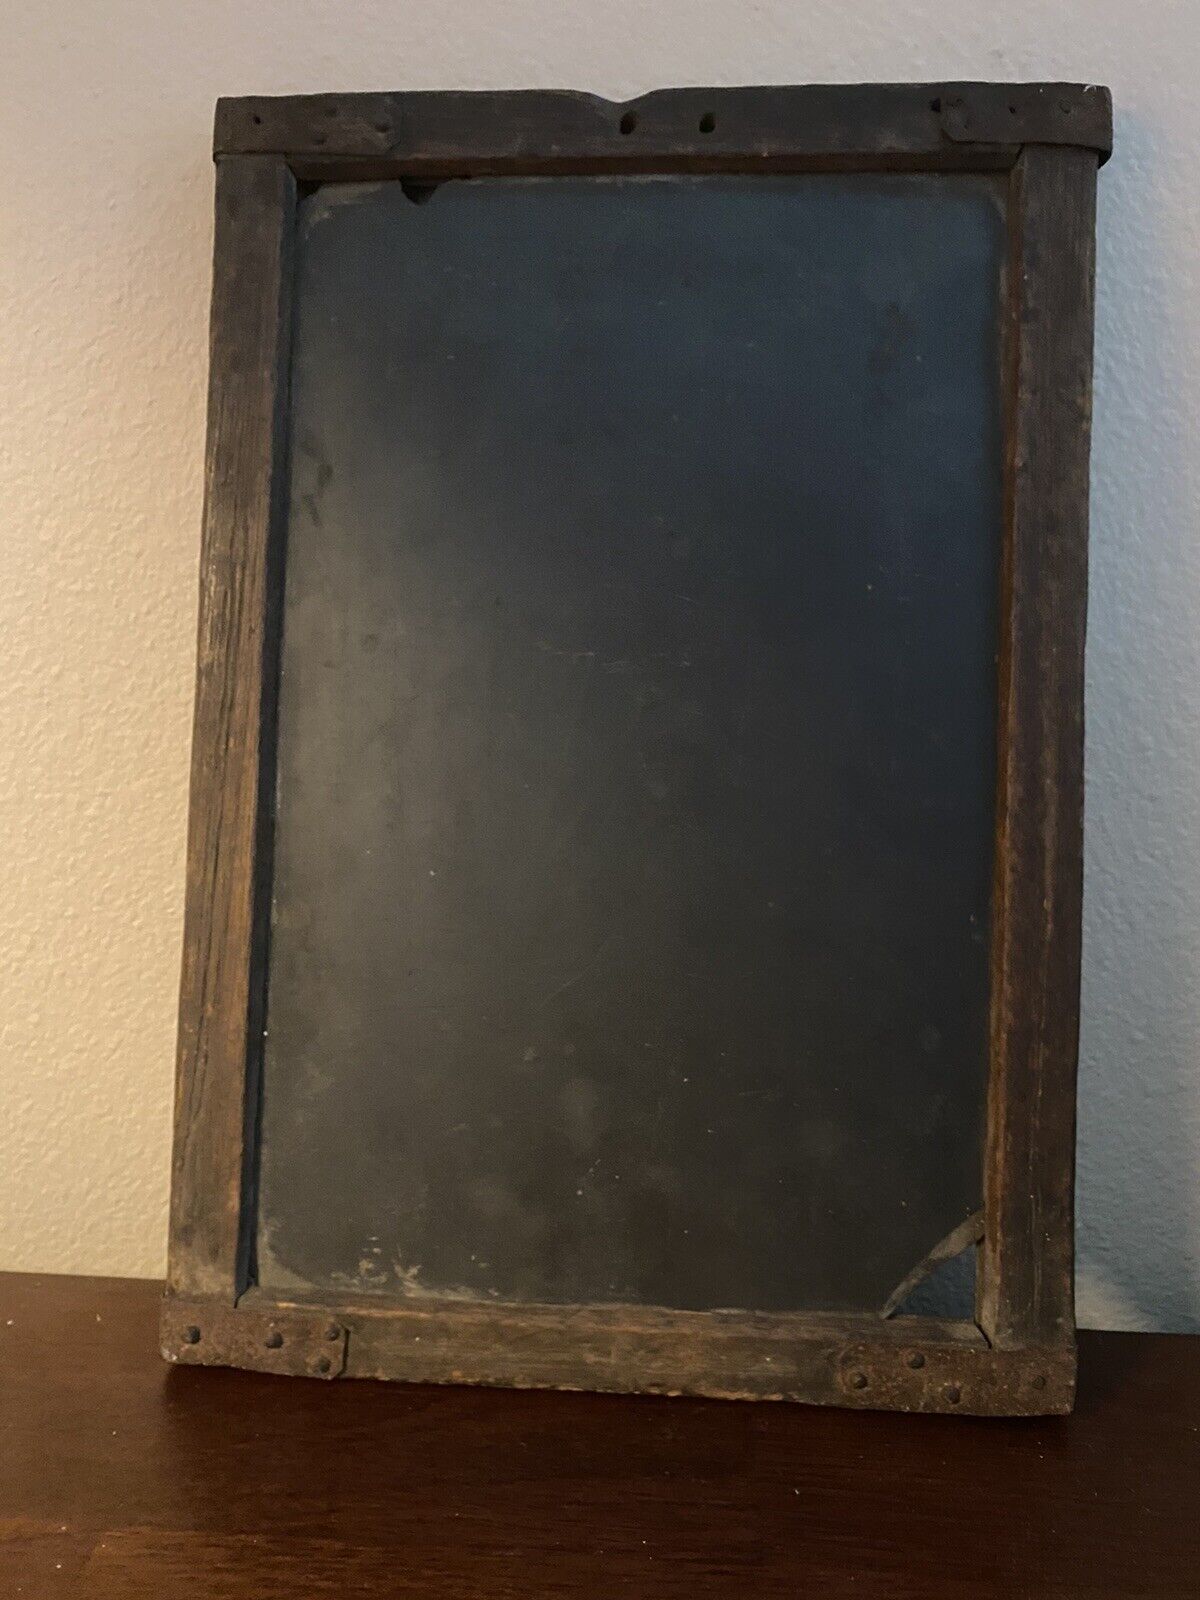 Antique Valuations: LATE 19TH-EARLY 20TH SMALL SLATE CHALKBOARD